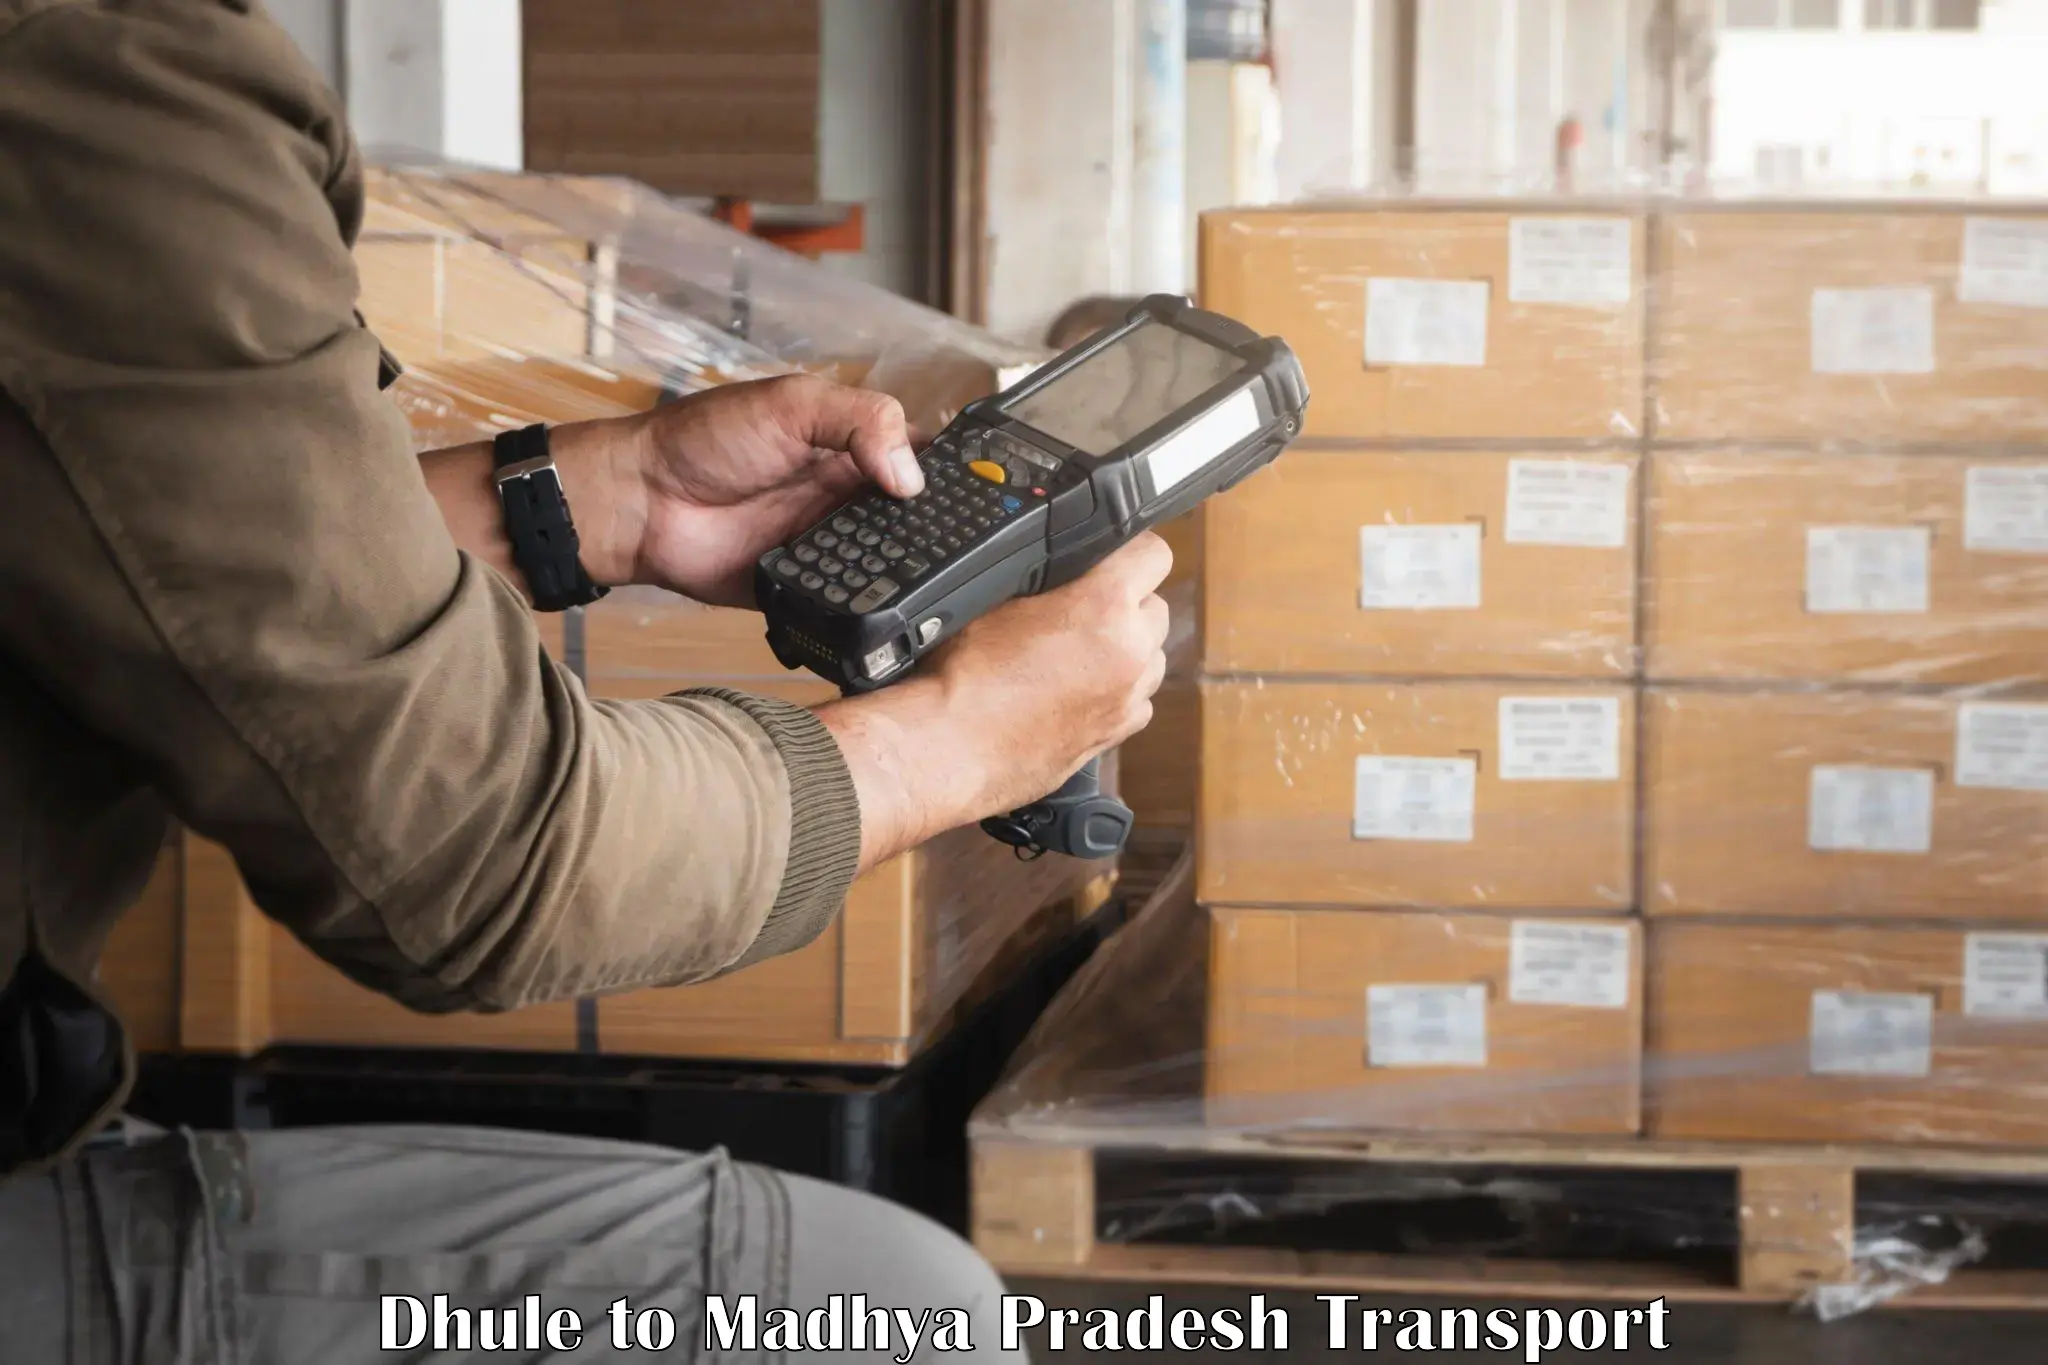 Air freight transport services Dhule to Nepanagar